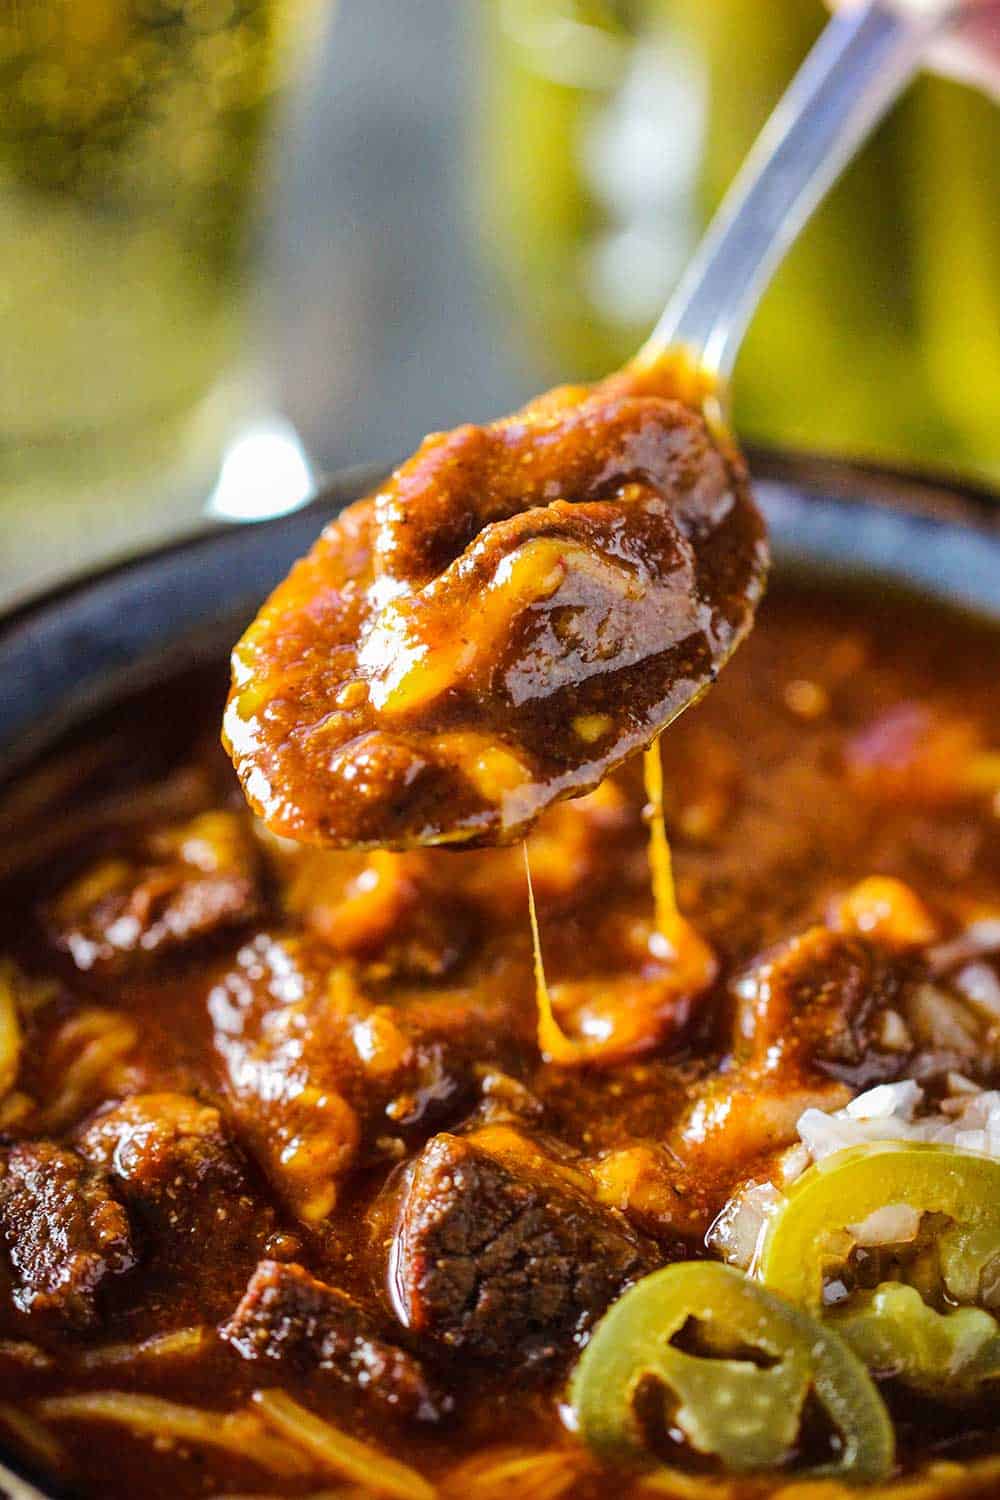 A spoon lifting a helping of Texas-style chili from a bowl of the chili with cheese dripping off the sides.